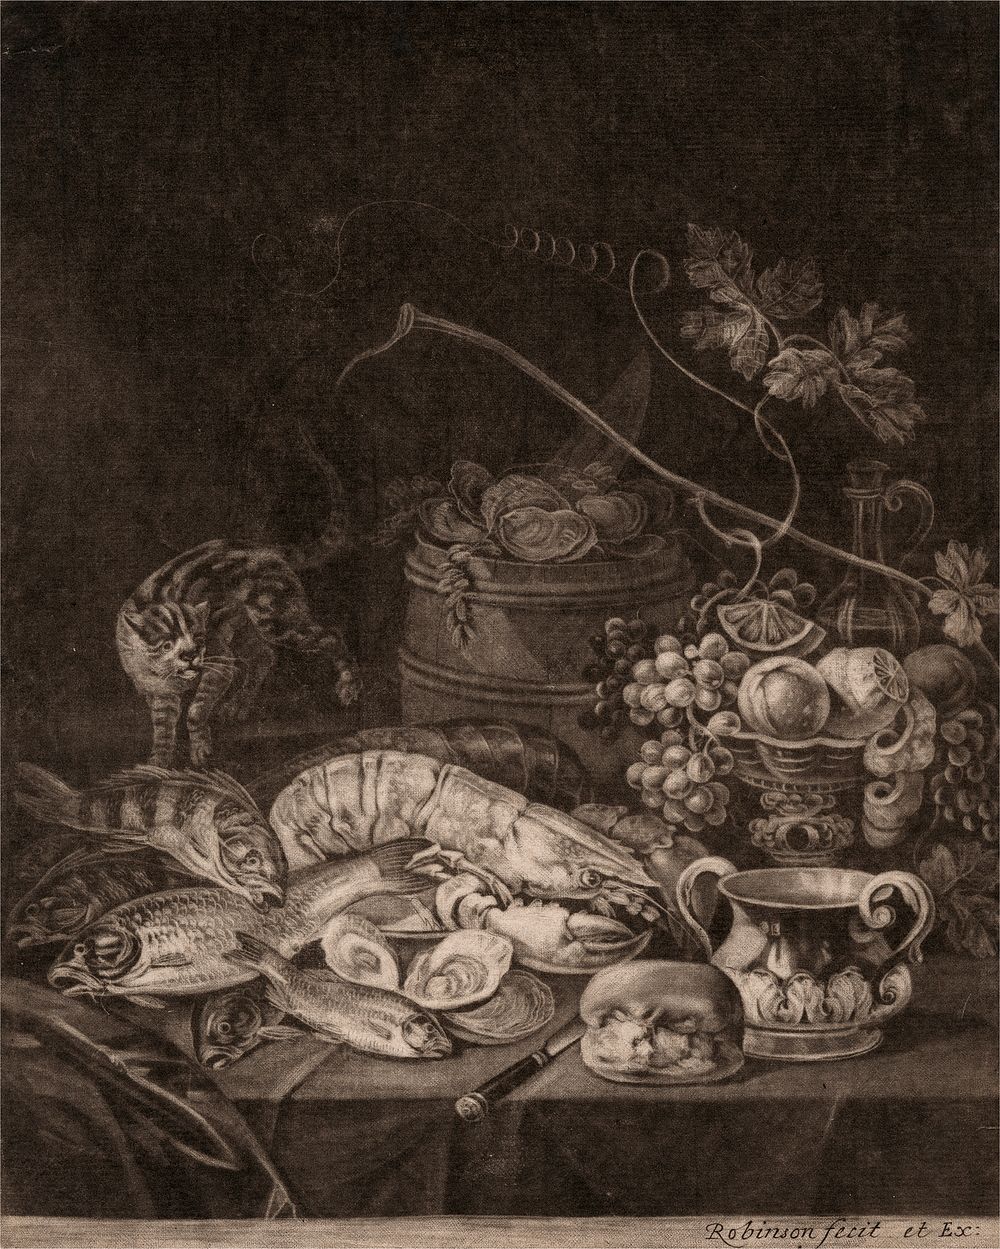 Banquet Piece with Lobsters, Fish, and Cat